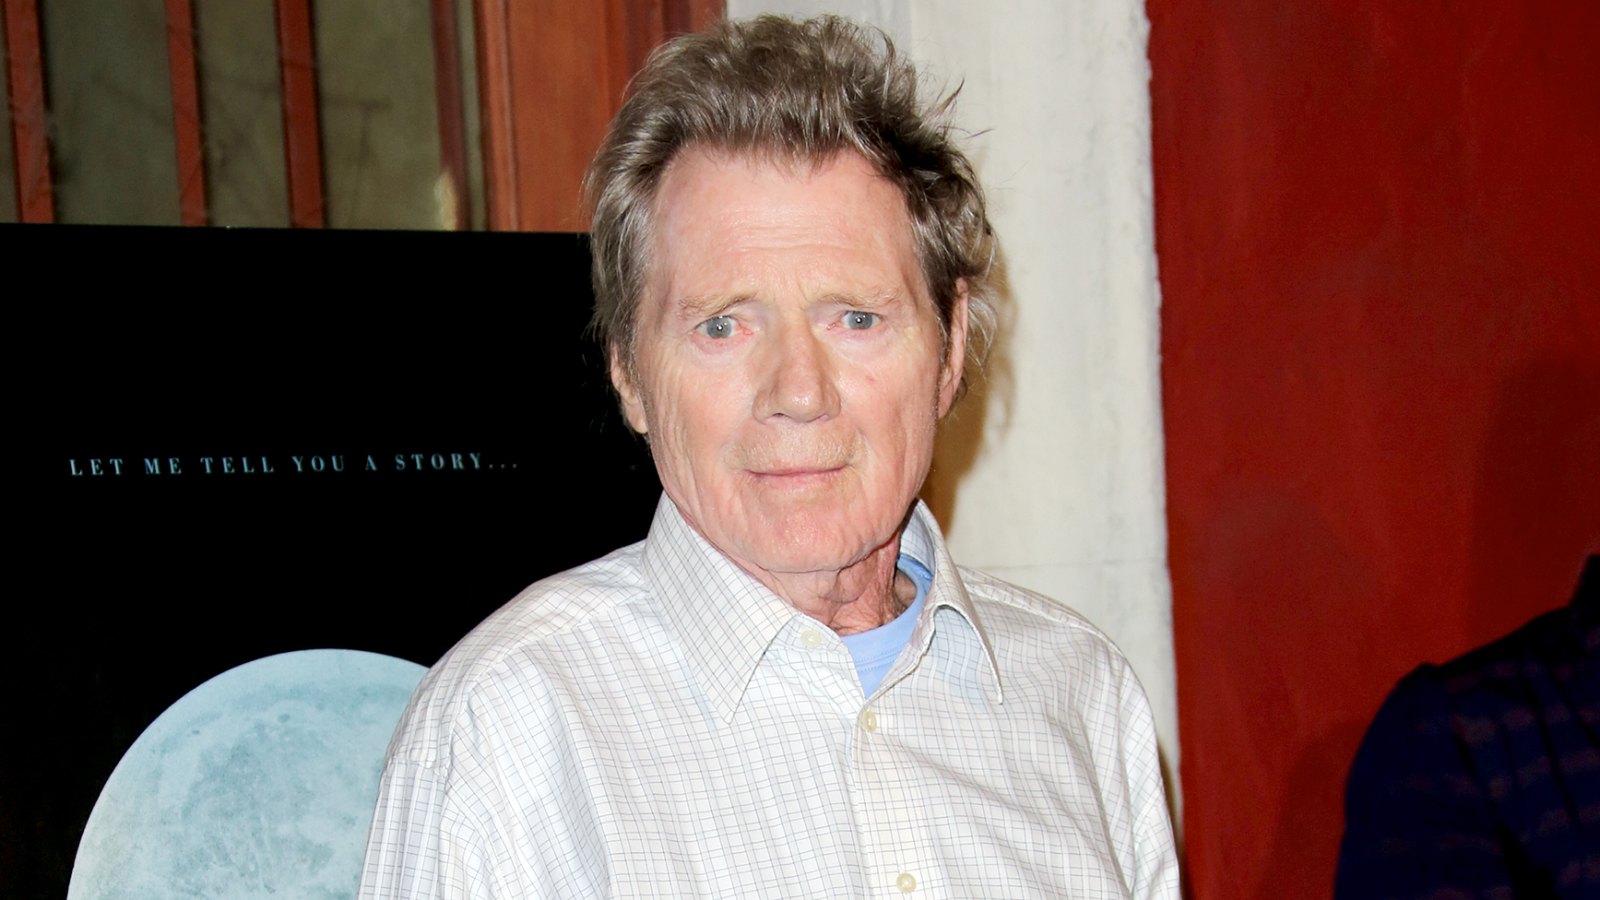 Michael Parks attends the Los Angeles premiere of "Tusk" at the Vista Theatre on September 16, 2014 in Los Angeles, California.